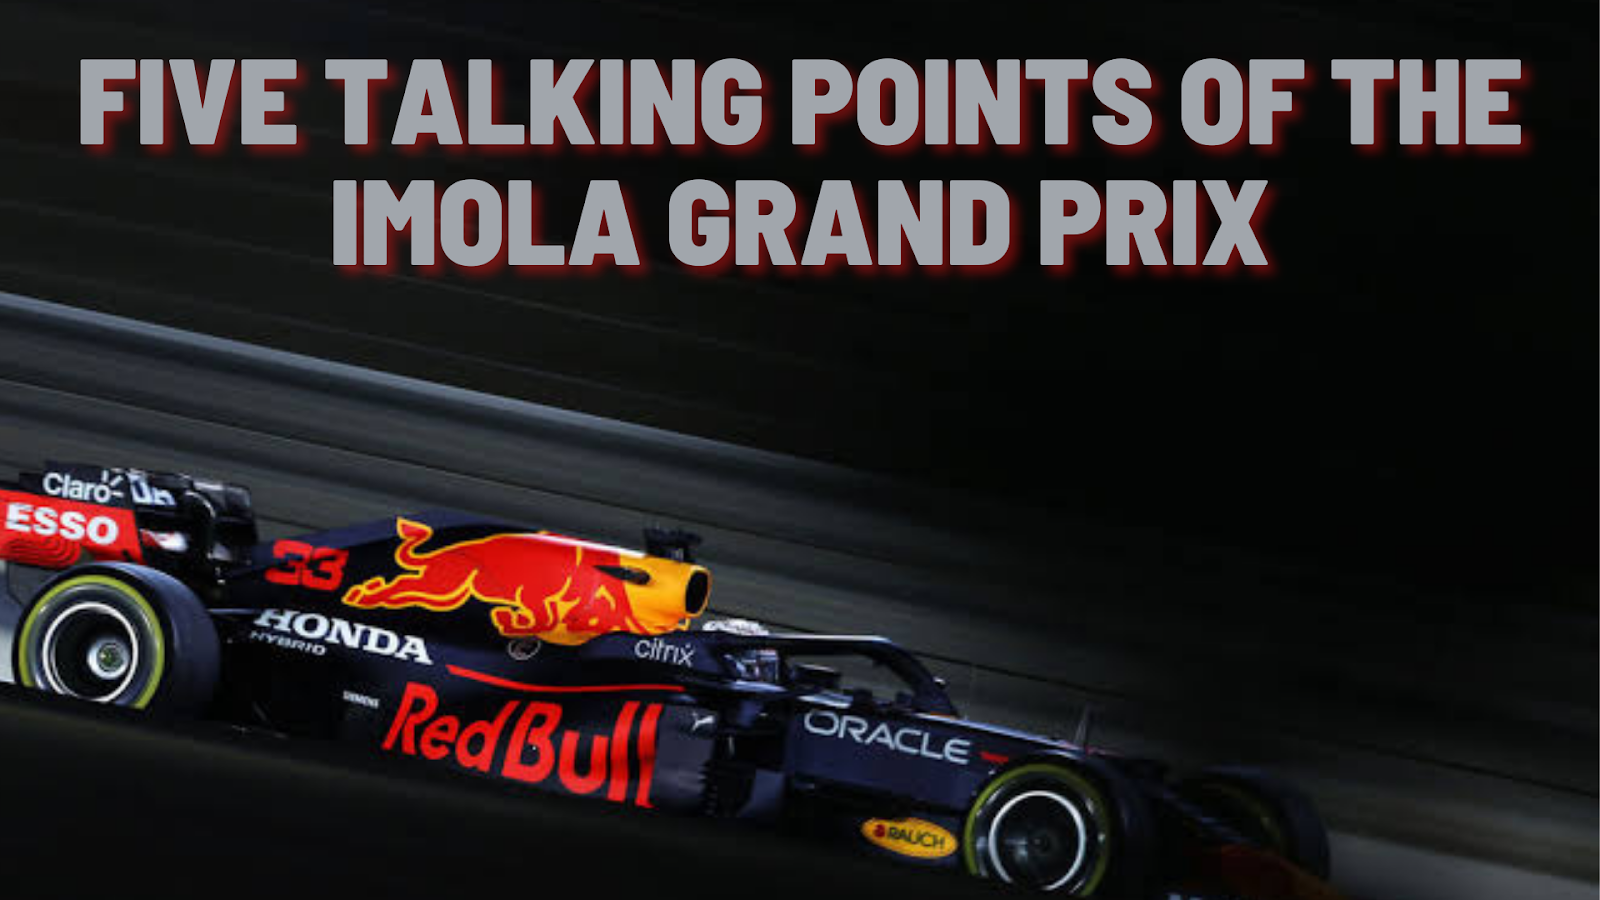 Five Talking Points of the Imola Grand Prix